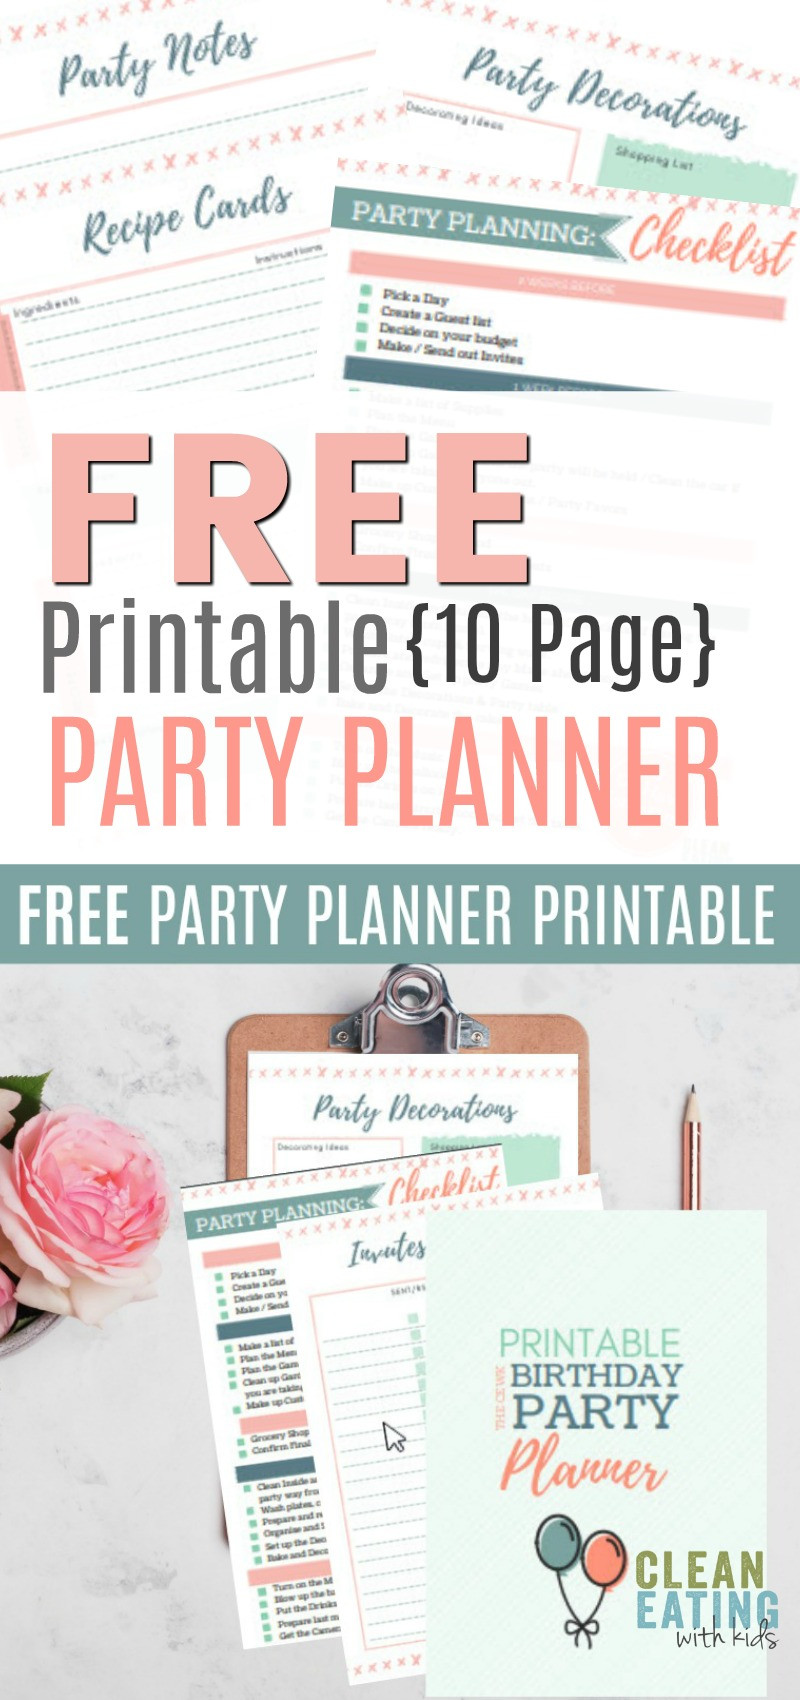 Birthday Party Organizer
 10 Page Printable Party Planner Clean Eating with kids